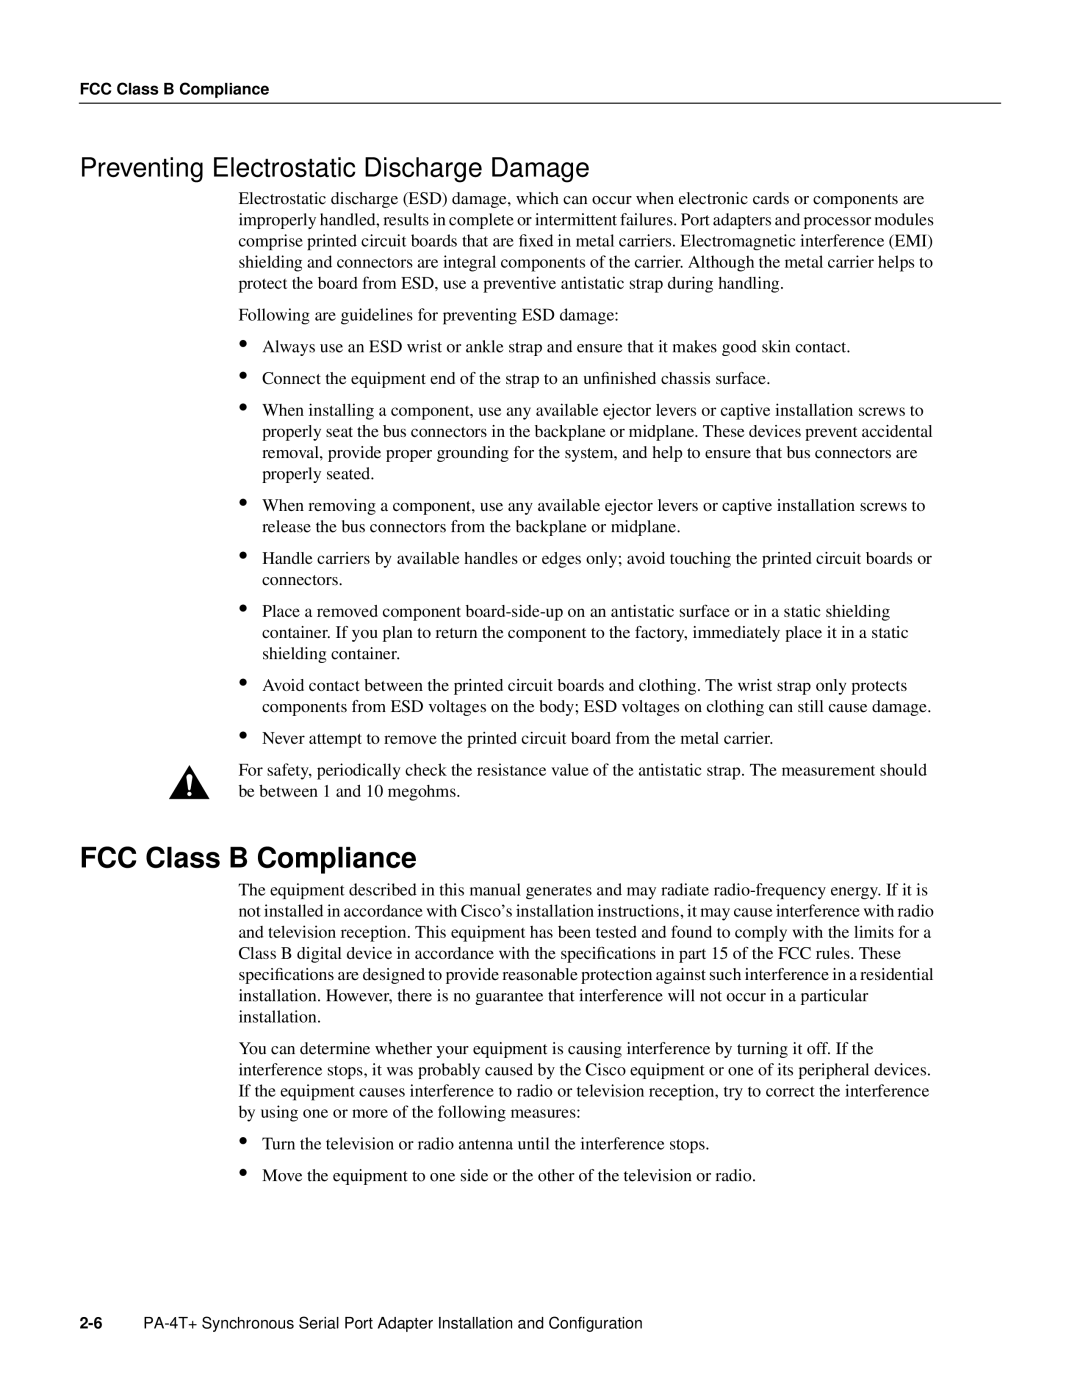 Cisco Systems PA-4T manual FCC Class B Compliance, Preventing Electrostatic Discharge Damage 